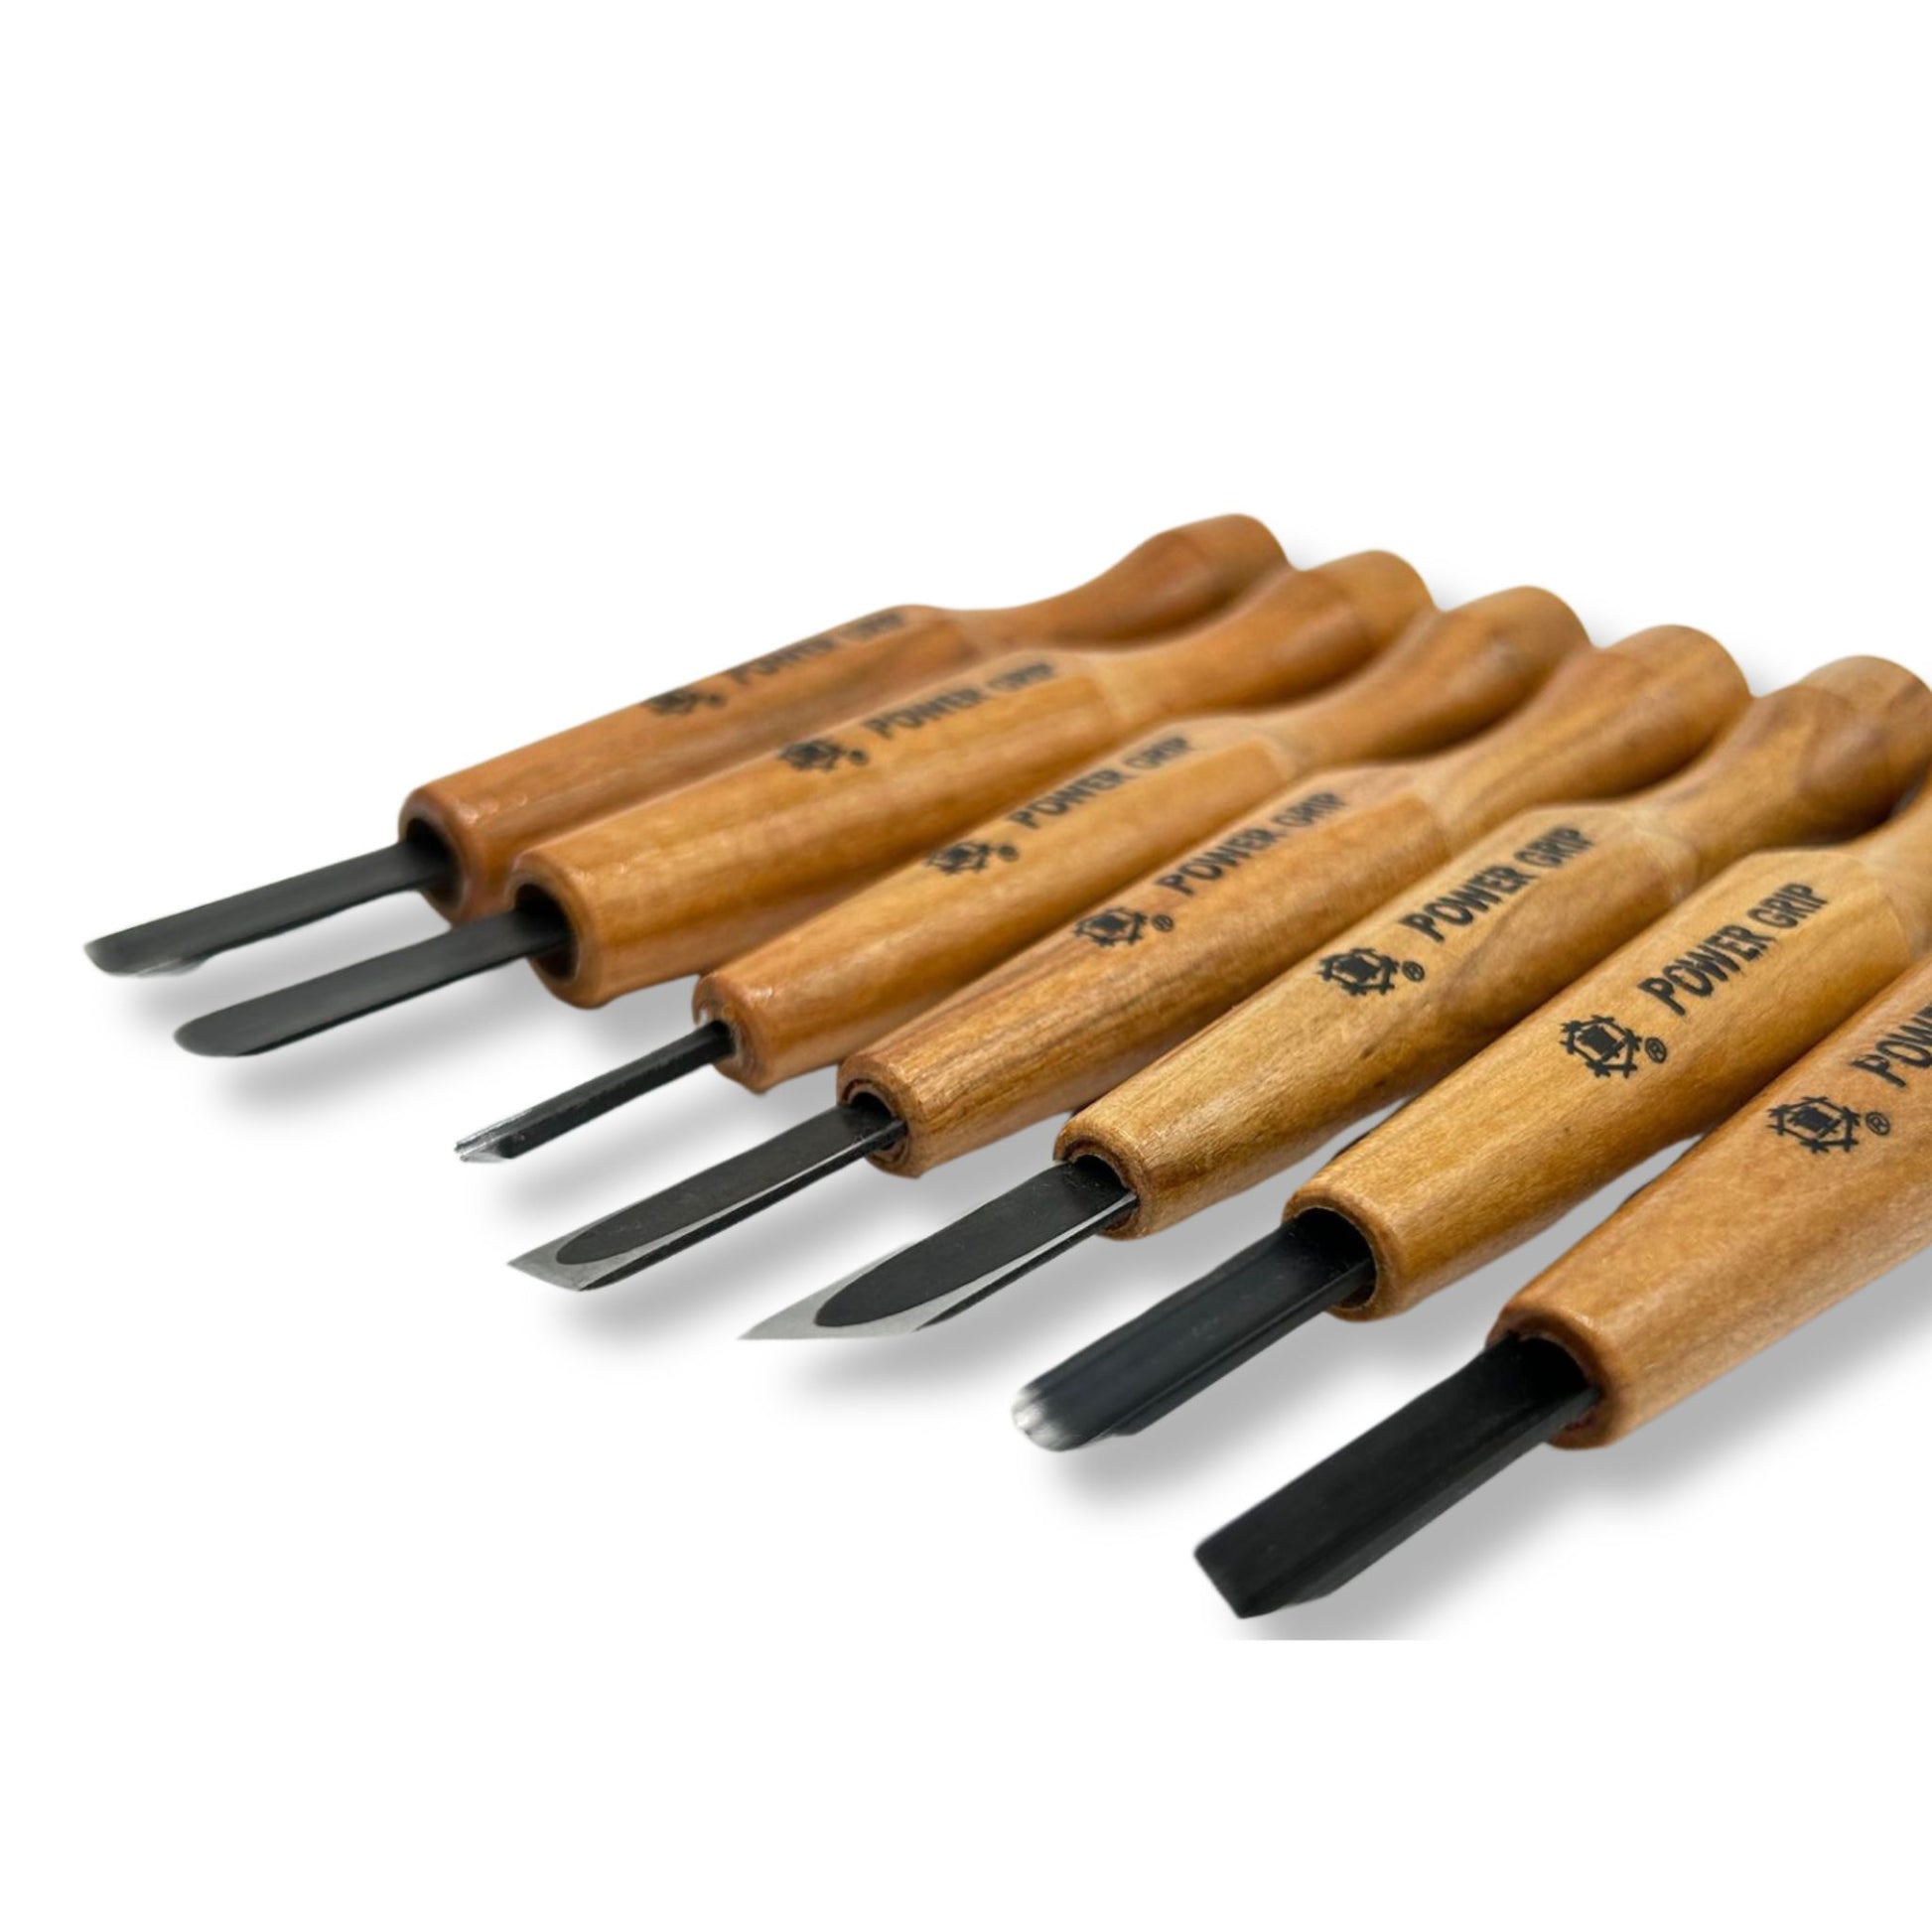 Mikisyo Power Grip Woodcarving 5-Piece Set Gouges & Chisels Wood